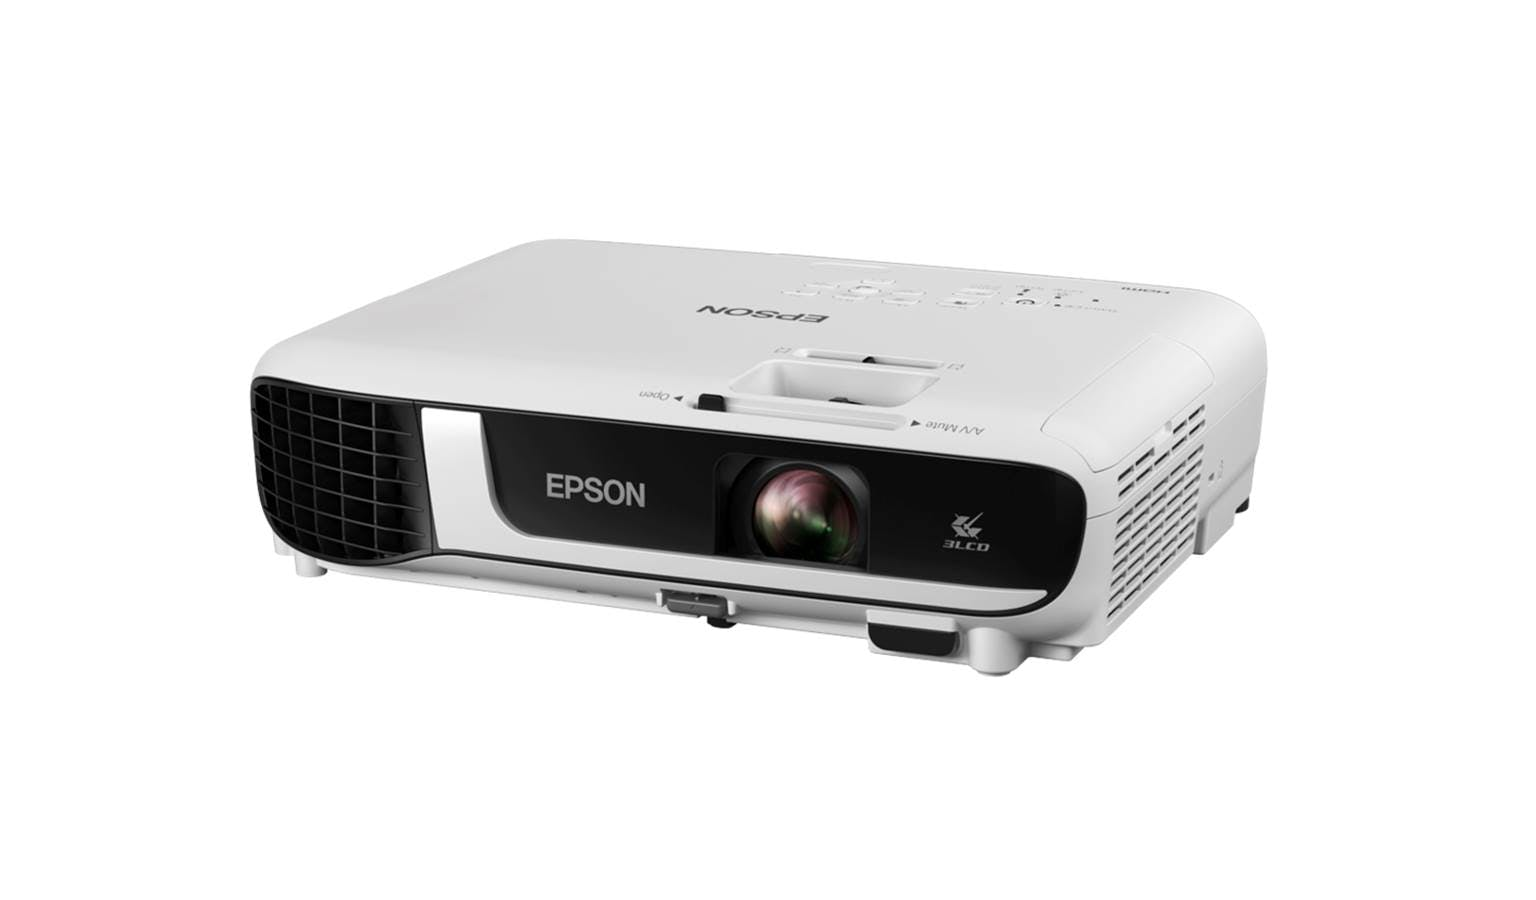 Epson Projector | WINPROMY CONSULTANCY SDN BHD. (1065242-V) All Rights Reserved.